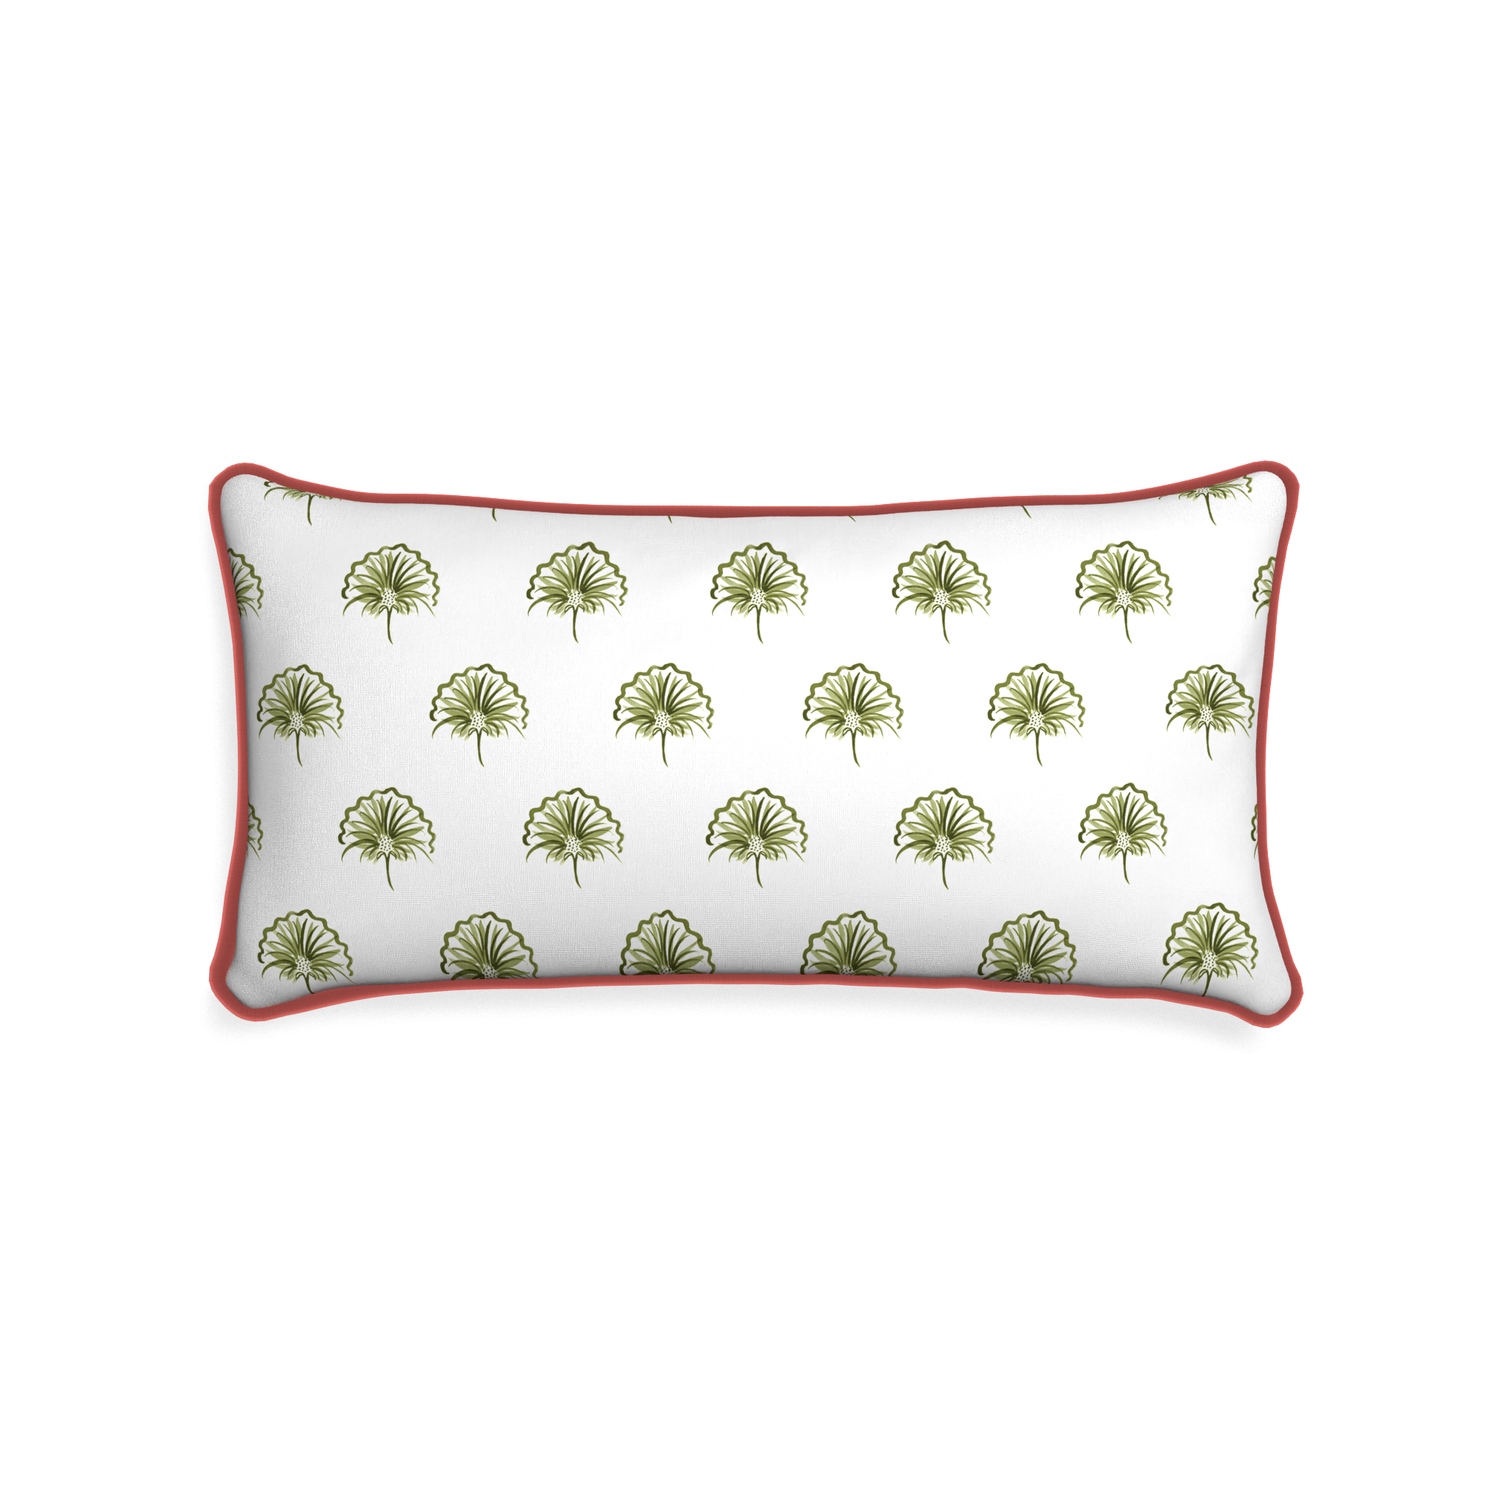 Midi-lumbar penelope moss custom green floralpillow with c piping on white background